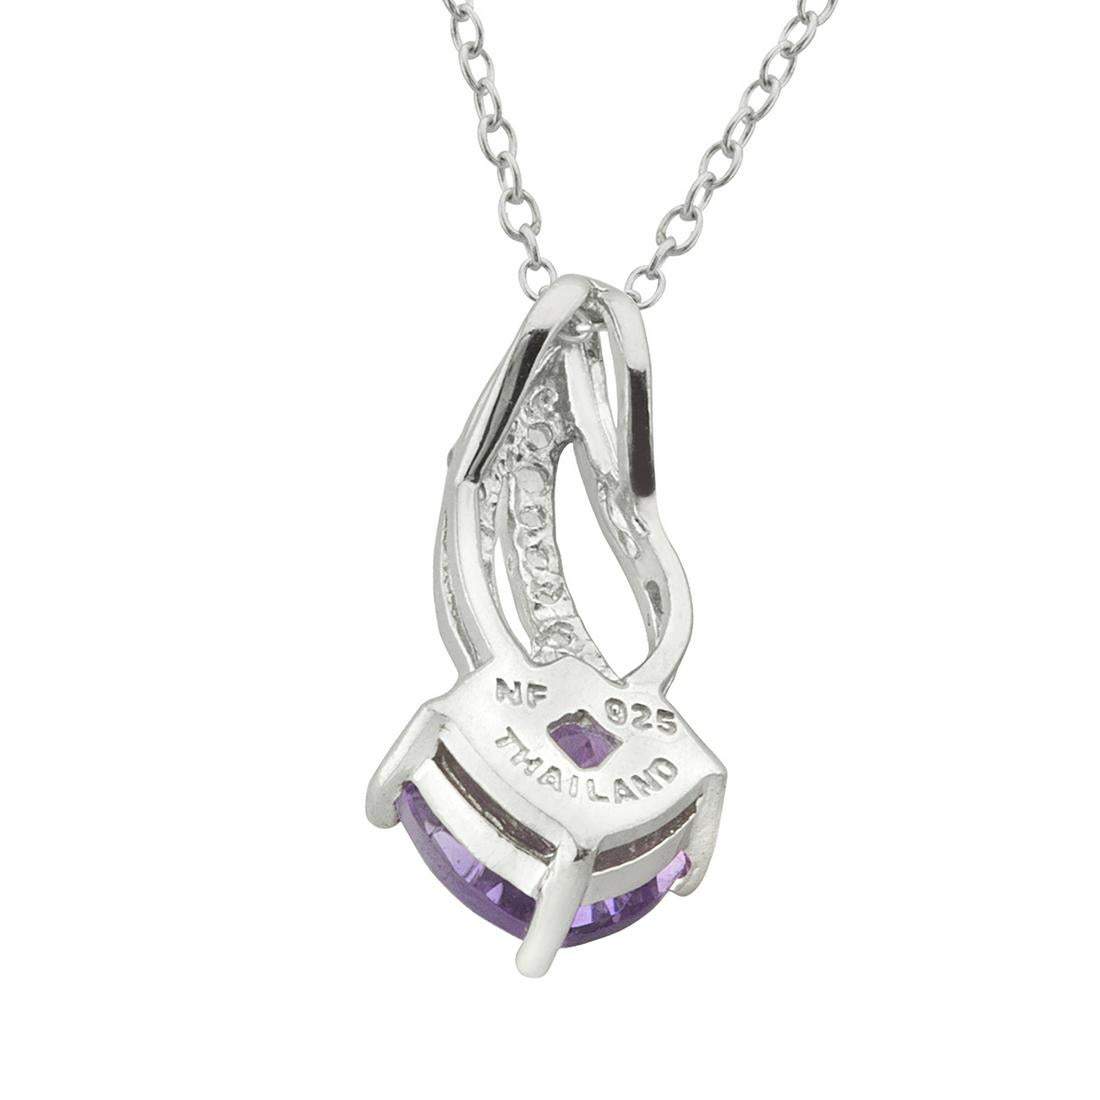 Sterling Silver Amethyst & White Topaz Swirl Pendant Necklace - Shop Thrifty Treasures